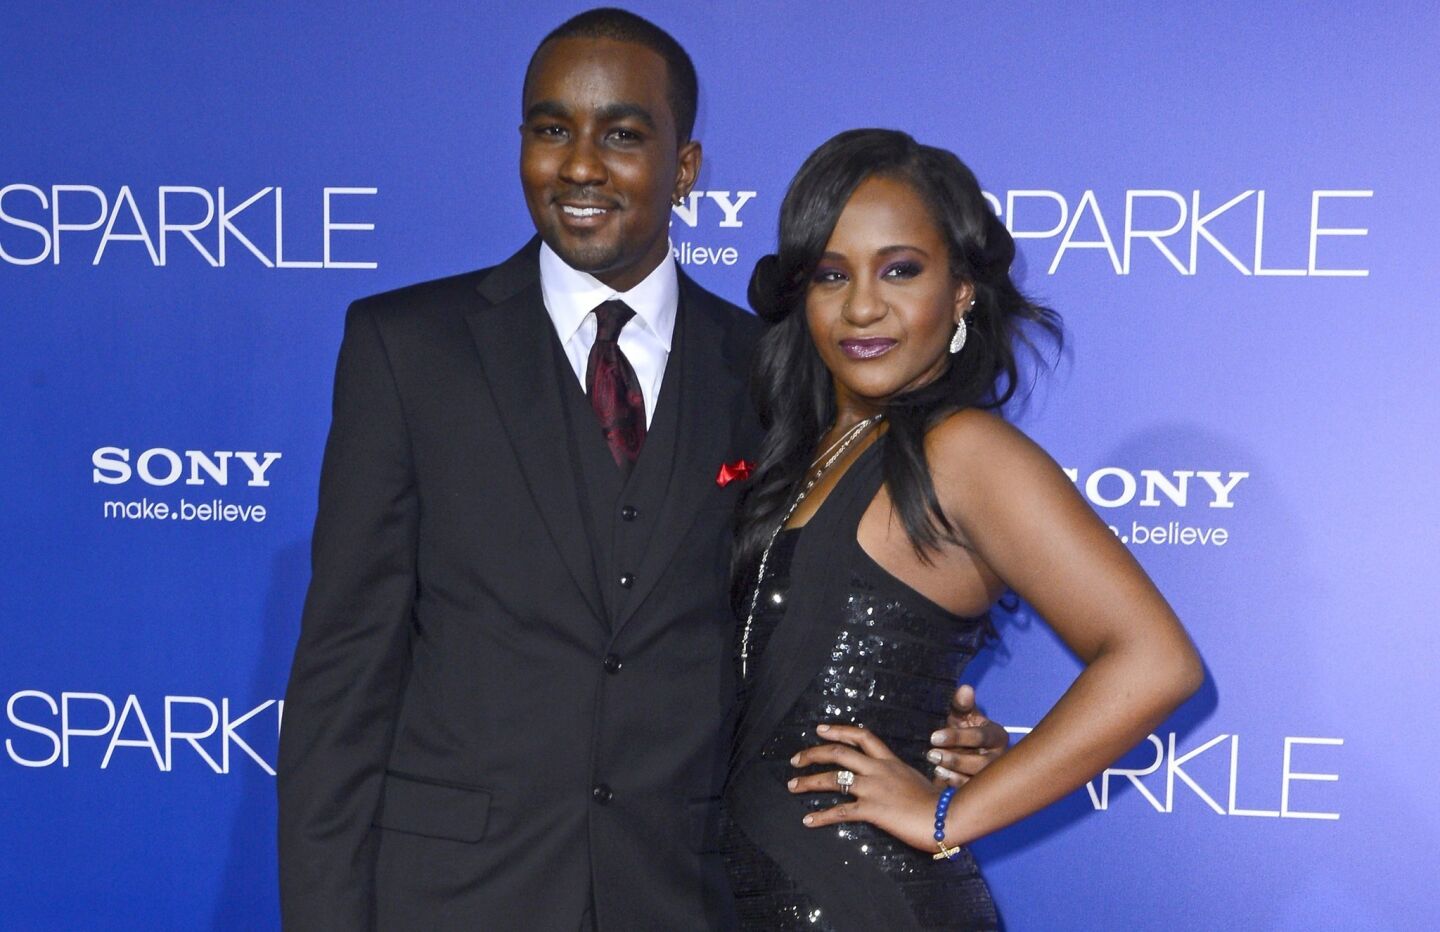 Bobbi Kristina Brown, daughter of the late Whitney Houston, has married Nick Gordon -- or so she said on Twitter in January and tweeted that there would be a ceremony later in the year. "@nickdgordon #HappilyMarried SO#Inlove if you didn't get it the first time that is.." she tweeted, decking out the message with emojis of a ring, a diamond, several thumbs-up, a heart and more. "Yerp!" reads a sticker in the picture. The status of Brown and Gordon's relationship has been a matter of some debate for a while now. Nick, of course, was Whitney's never-adopted-officially "son," and grew up with Bobbi Kristina from when he was age 12, which made their budding romantic relationship a bit uncomfortable for some.